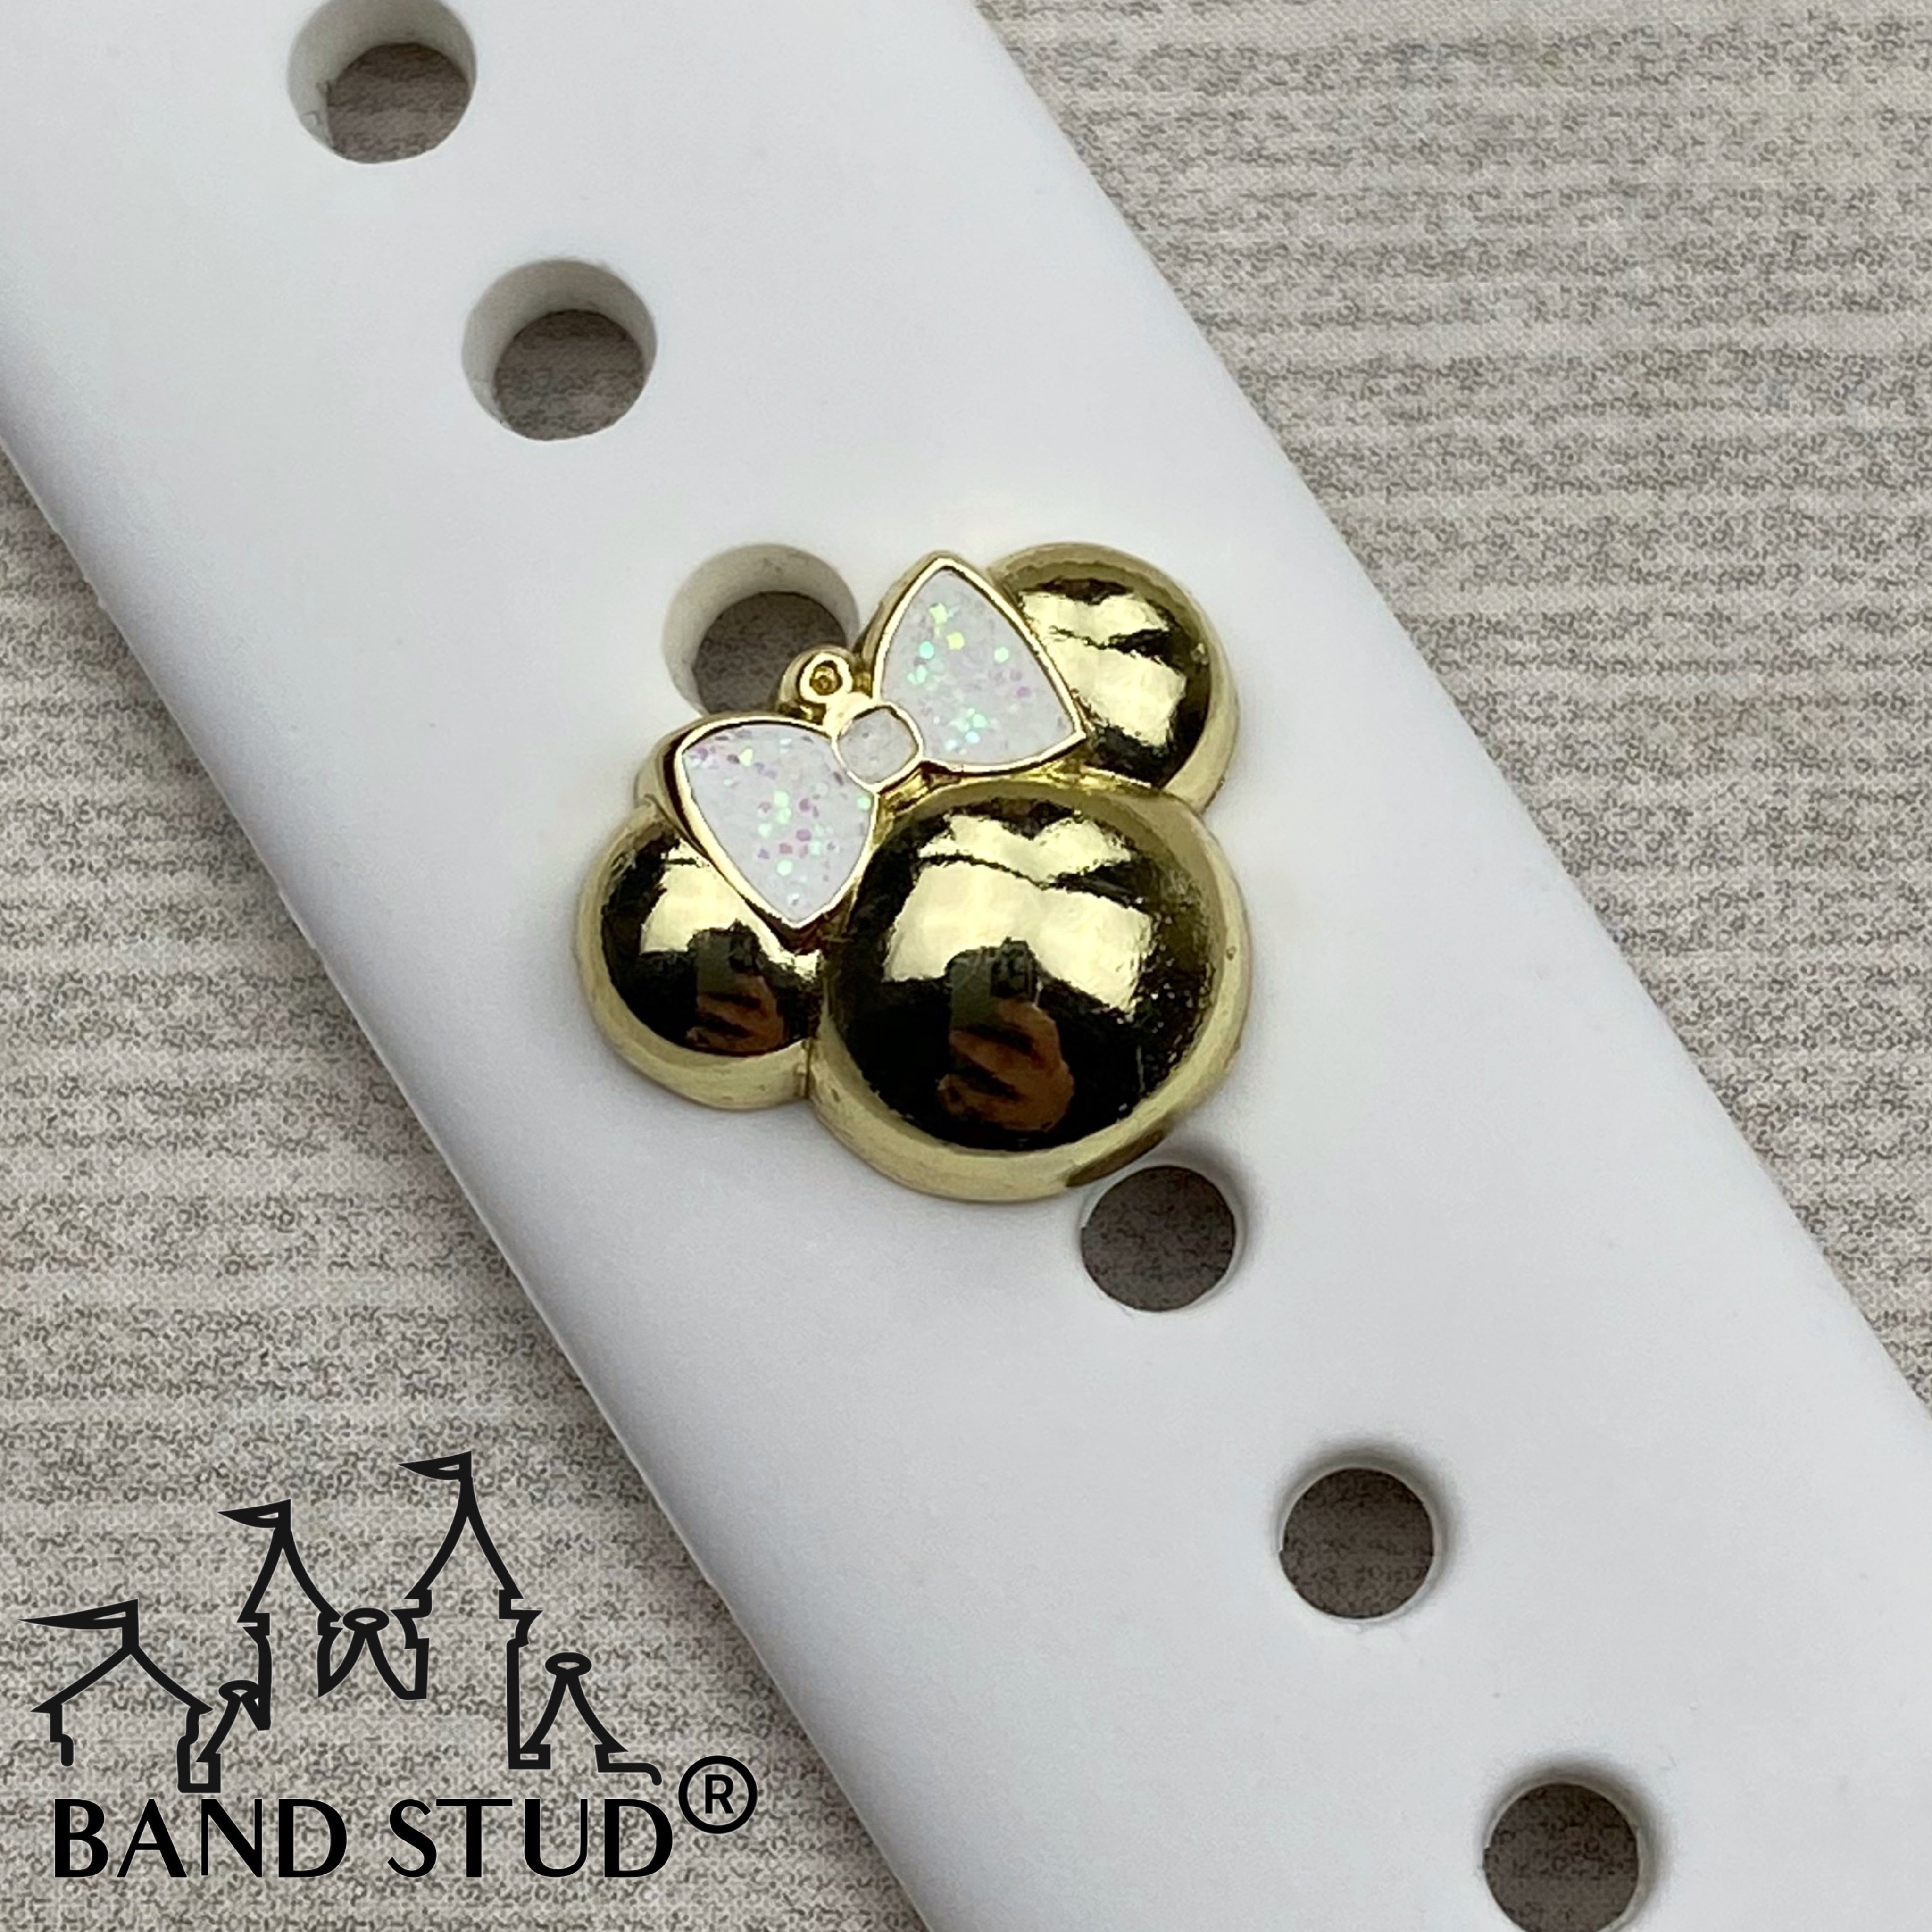 Band Stud® - Christmas Collection - Magical Miss Ornament